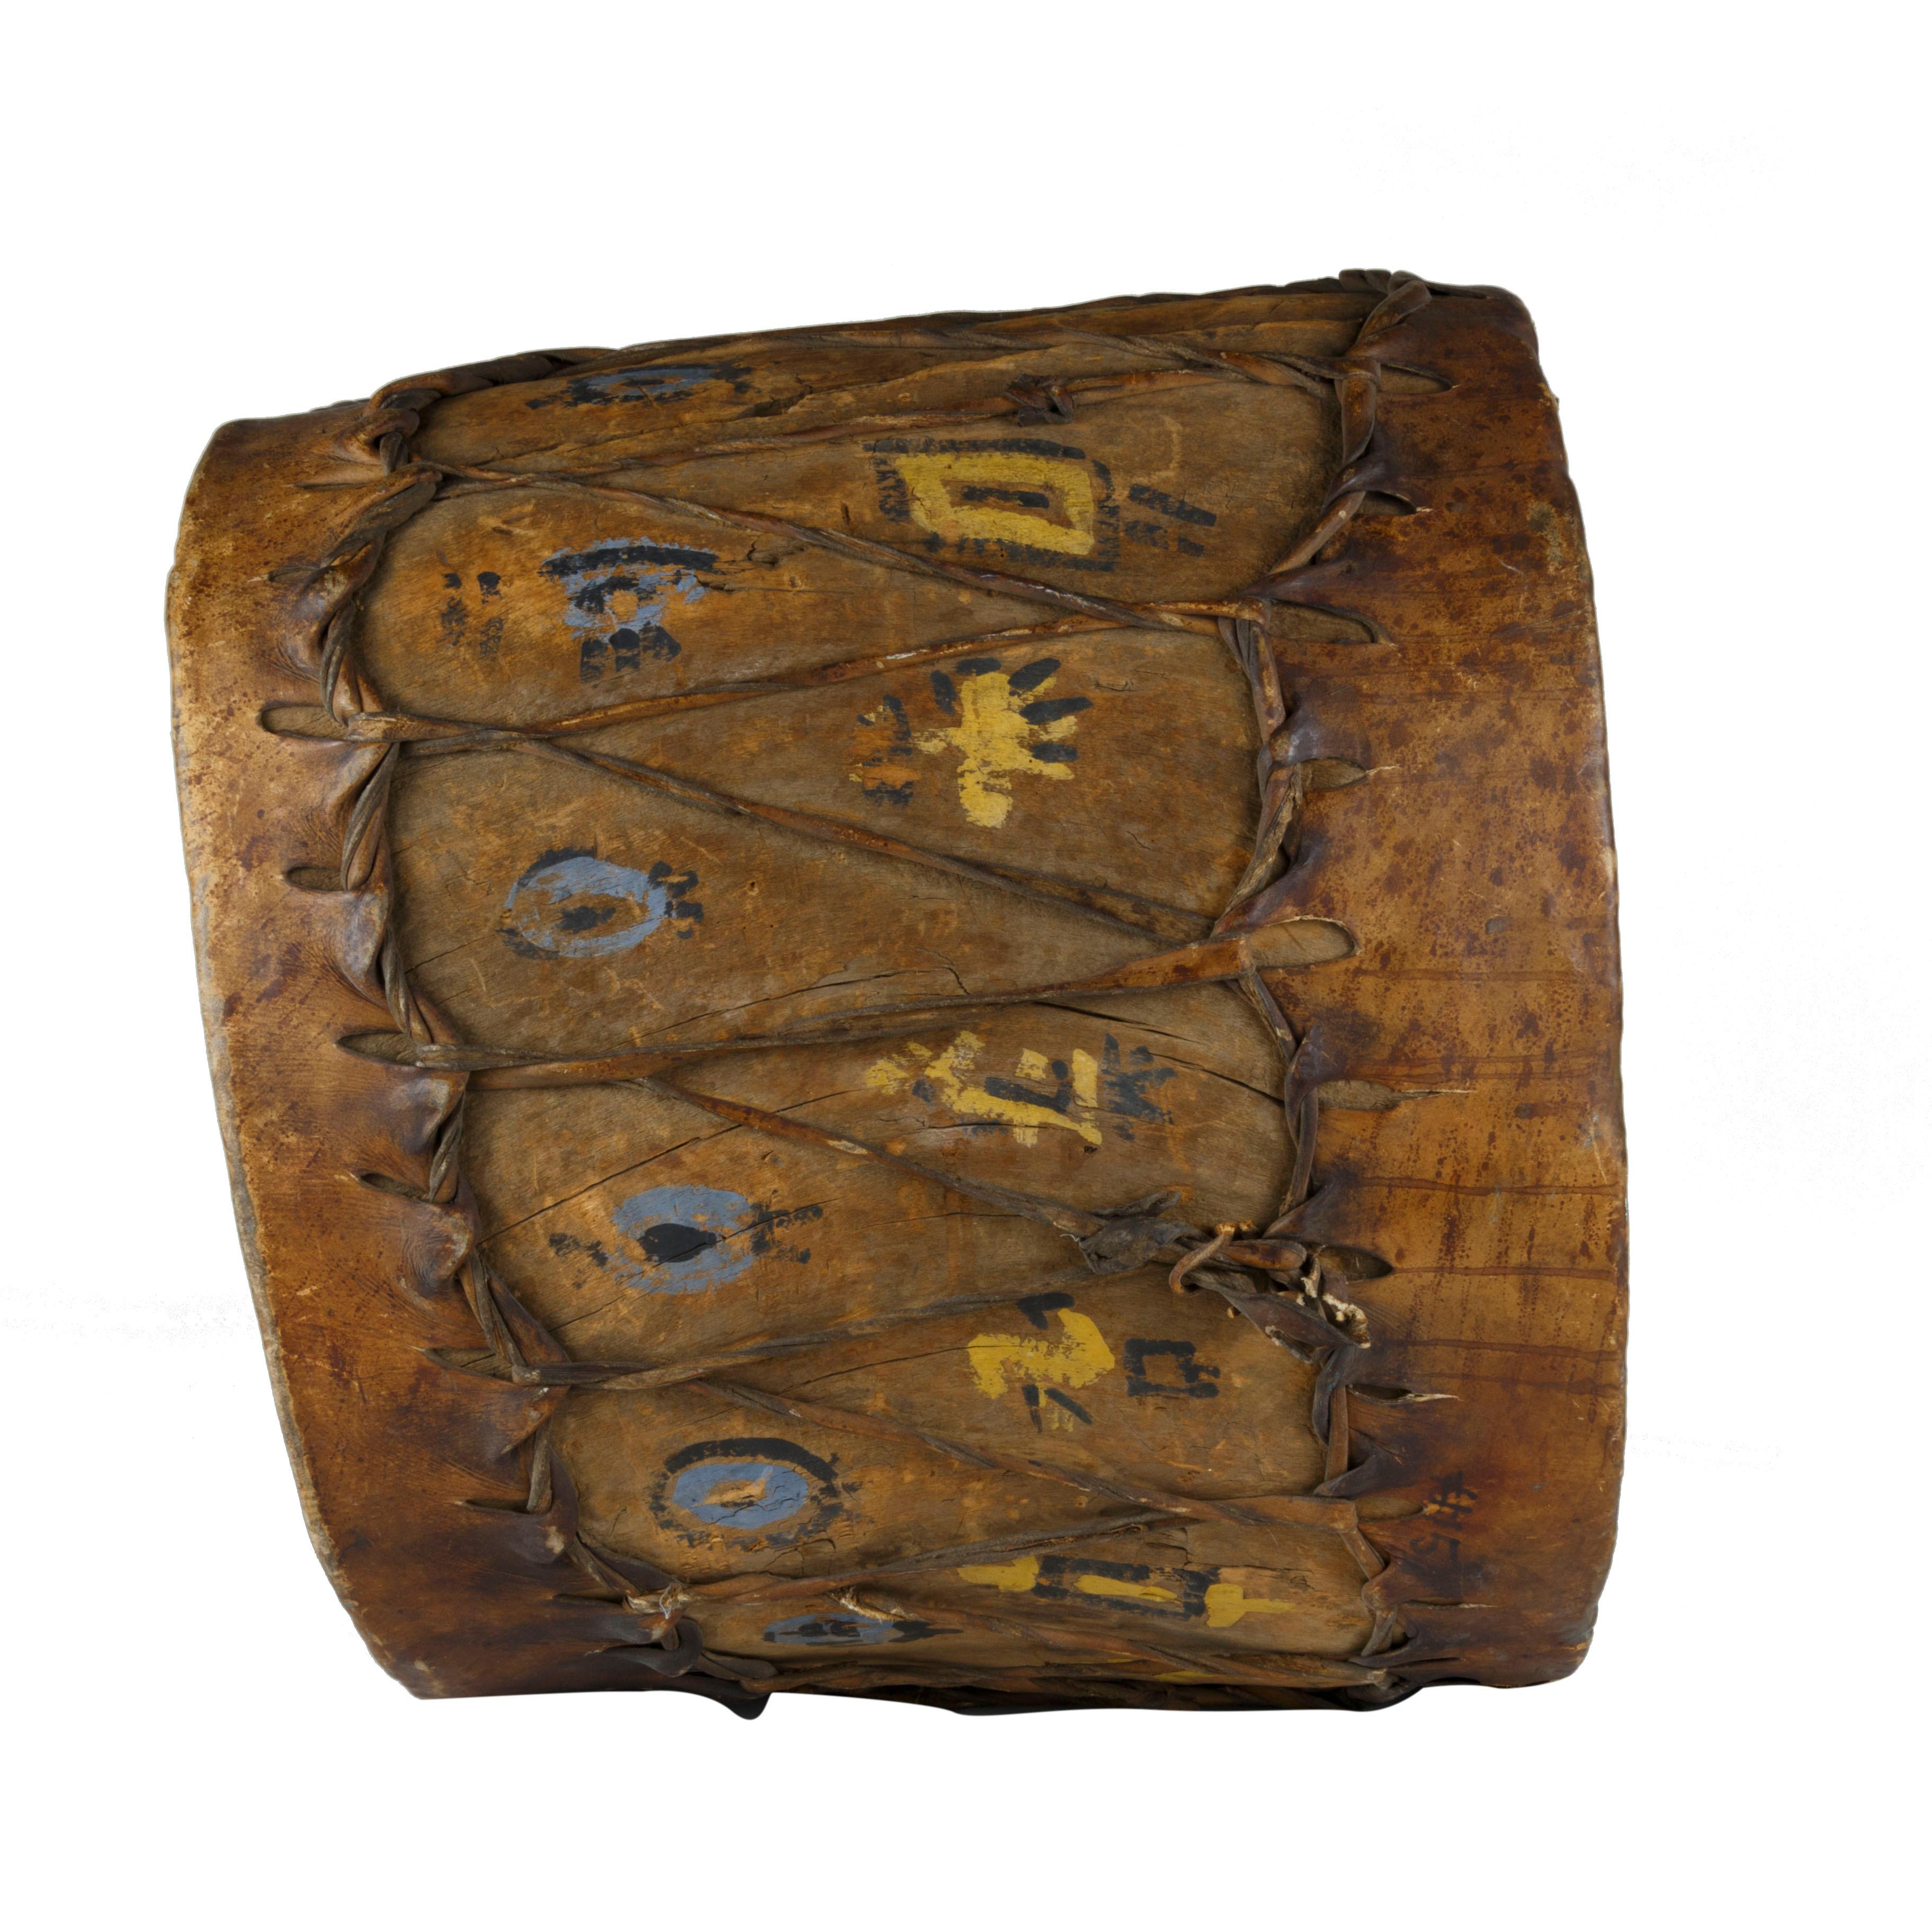 Native American Pueblo Indian cottonwood trunk drum - it's old. Pueblo drum made from a hollowed out cottonwood trunk, old milk paint, - this one's been used.

Period: 19th Century

Origin: Southwest

Size: 21